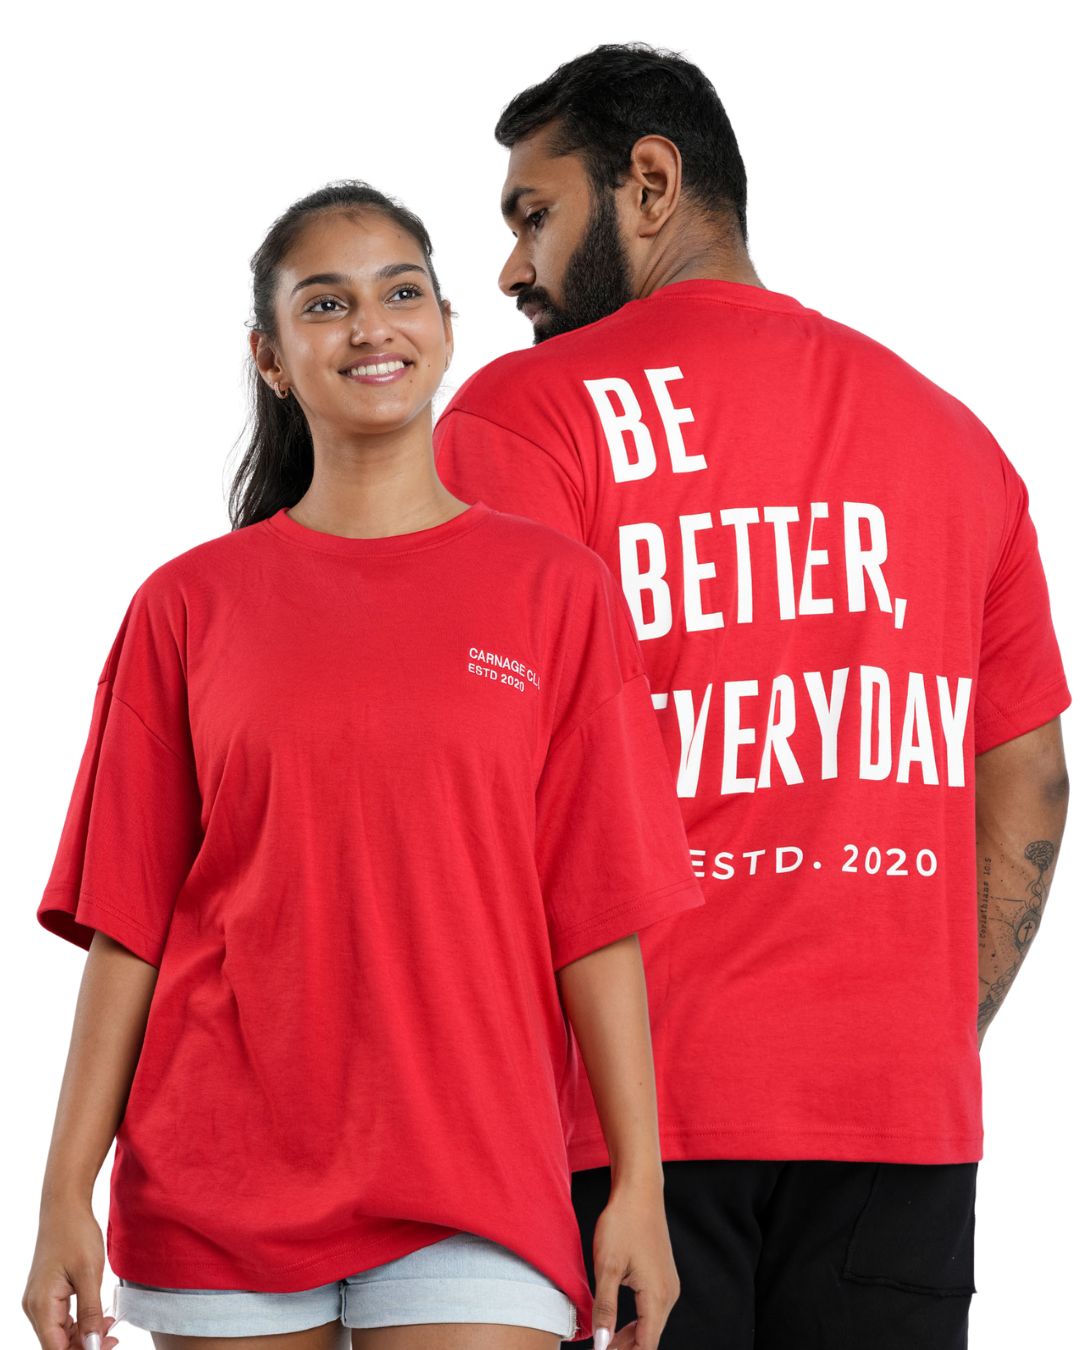 Mission Wording Supersized Tee - Red - Unisex